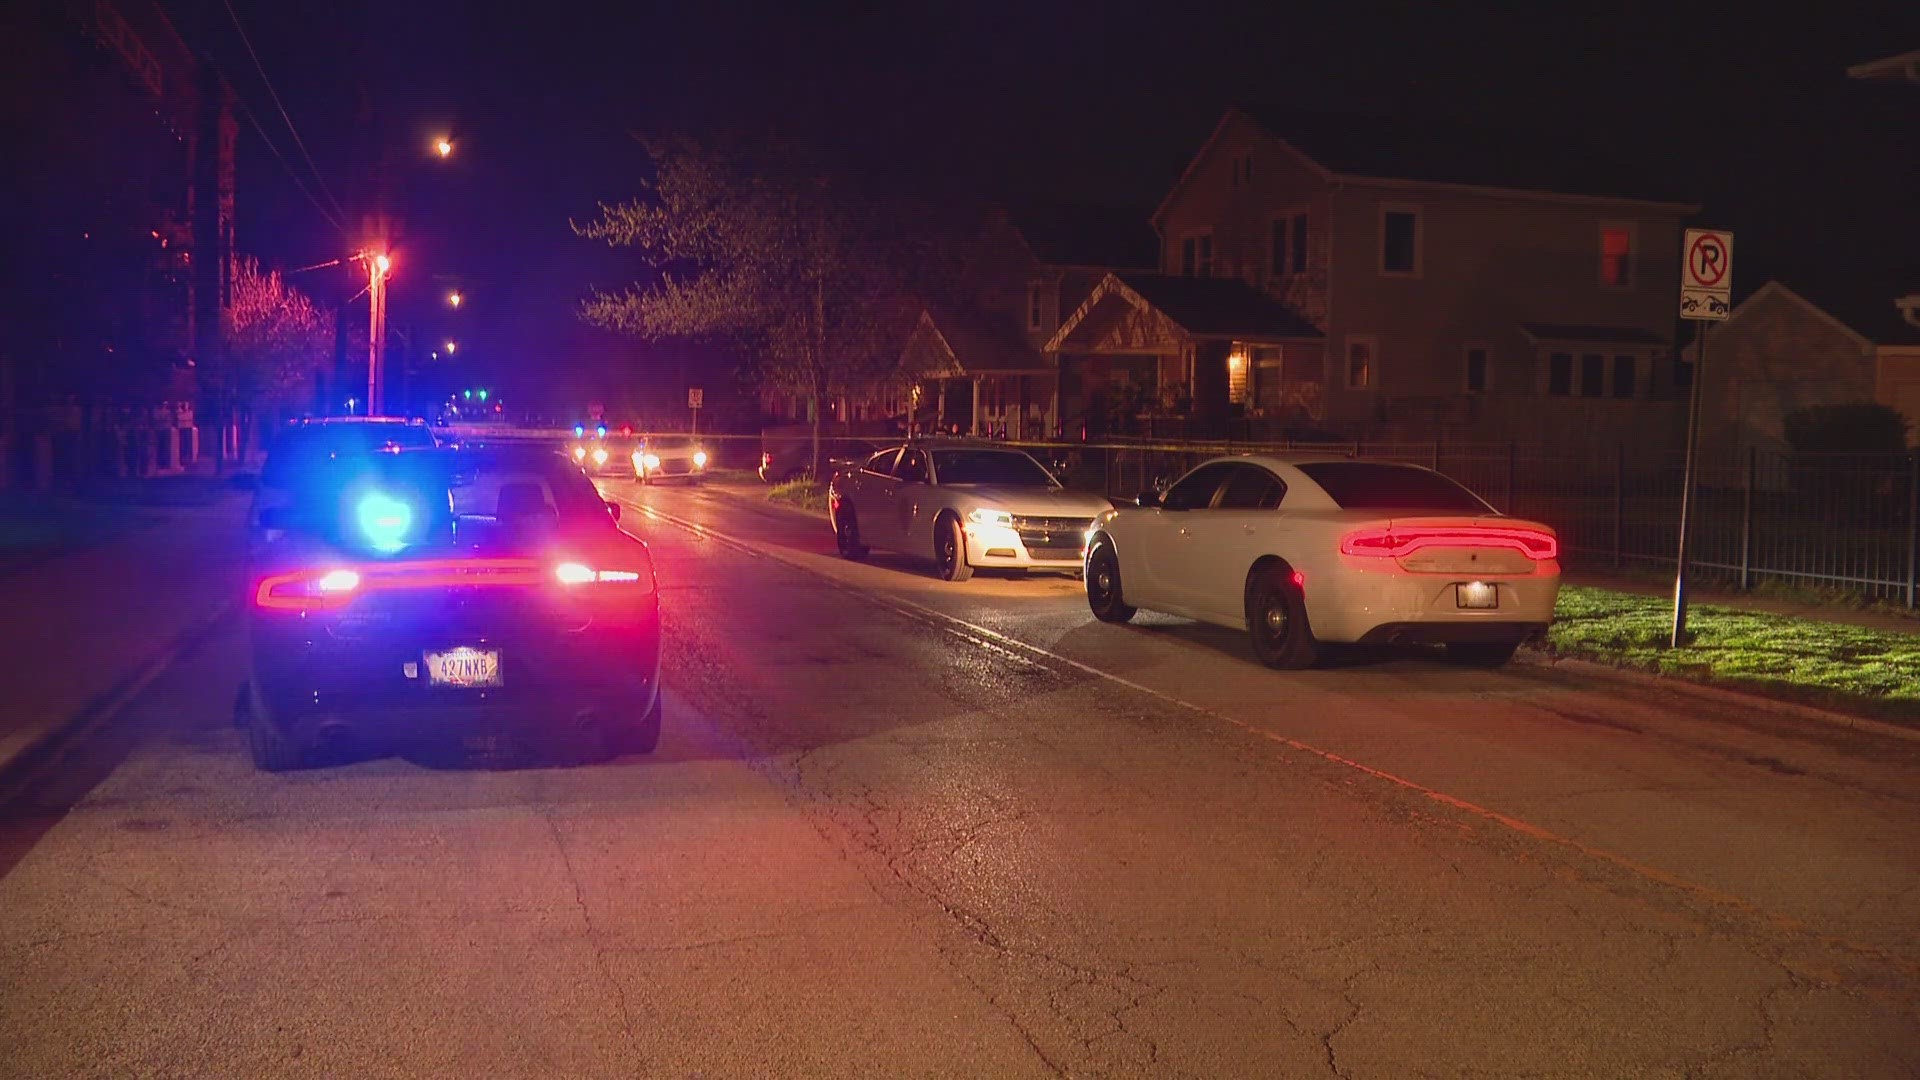 The shooting happened around 11:45 p.m. April 13 in the 500 block of East 42nd Street, west of College Avenue.